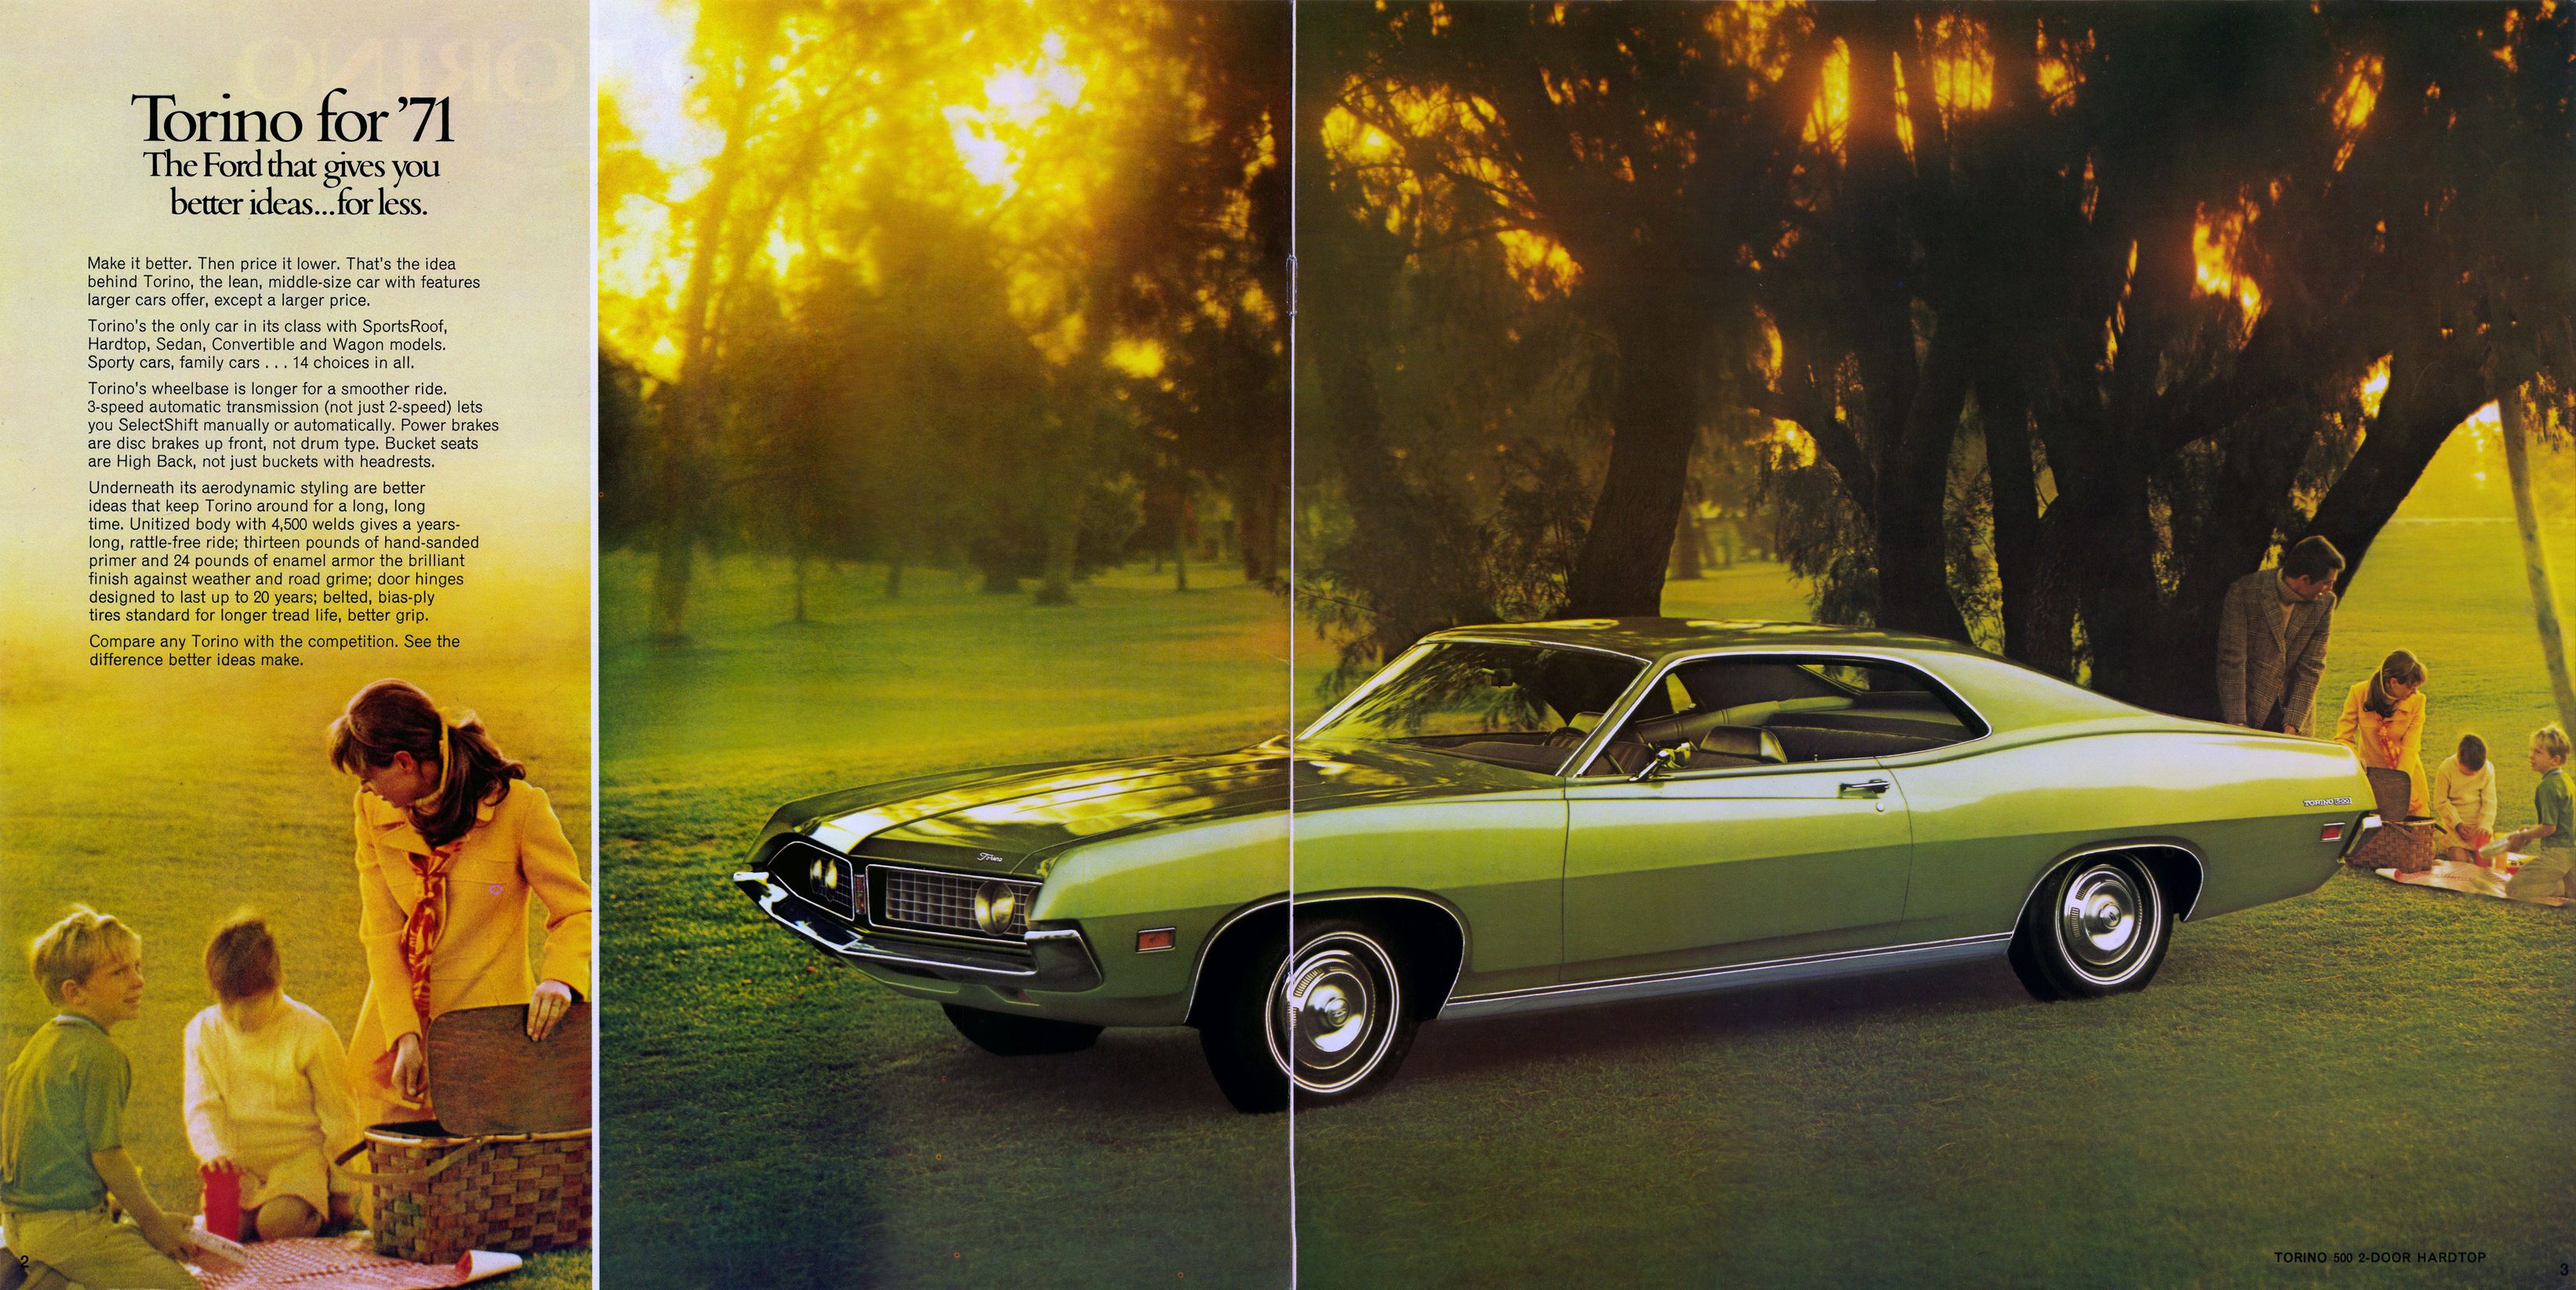 1971 Ford Torino Brochure Page 2